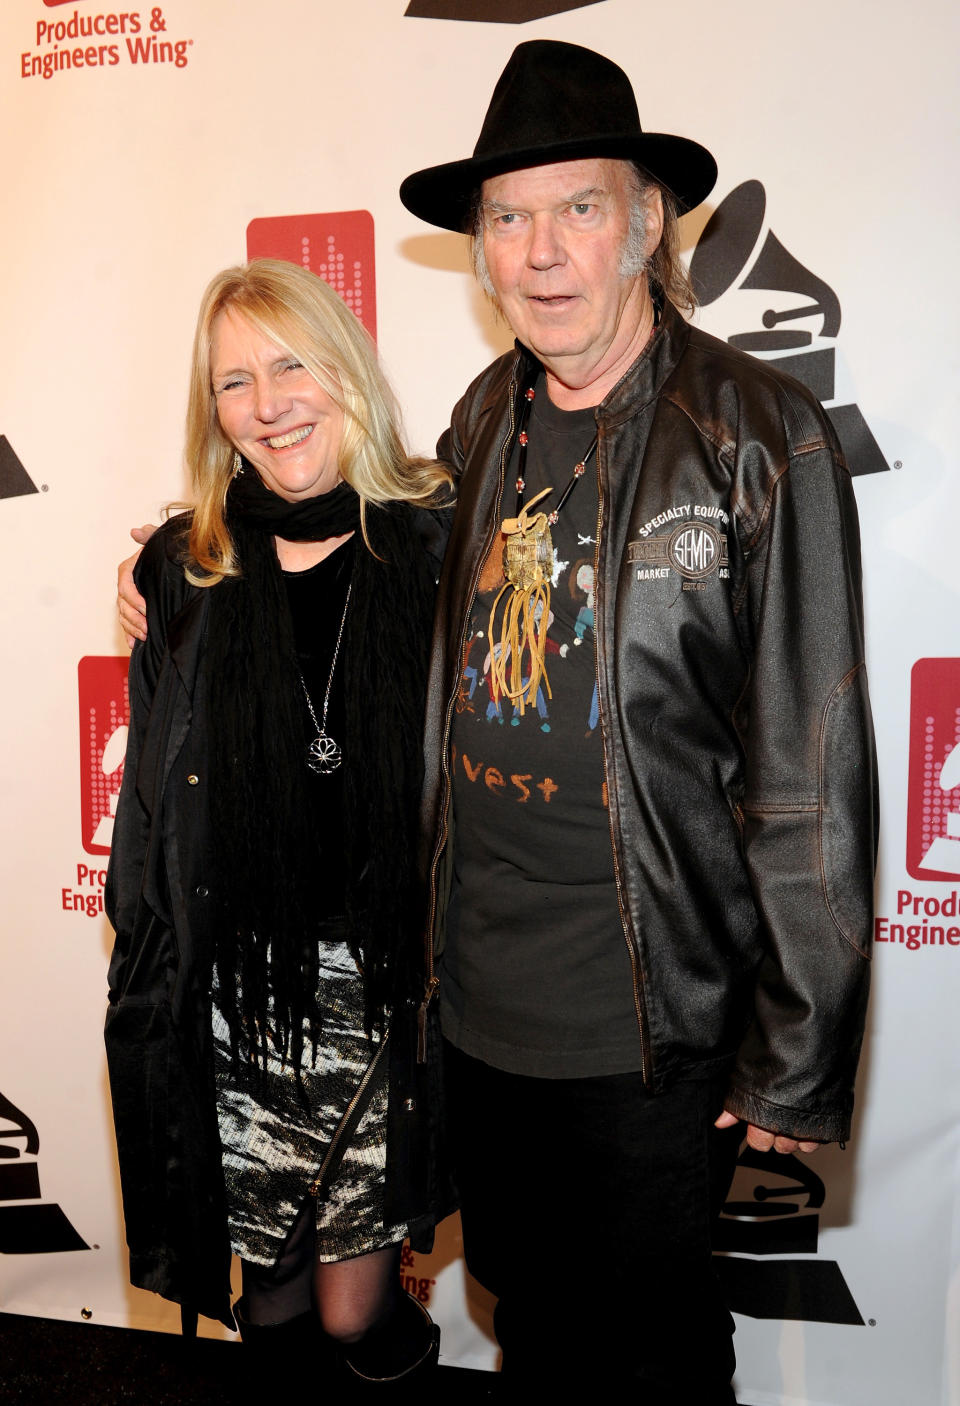 Honoree Neil Young, right, and Pegi Young arrive at the Producers and Engineers of The Academy's 7th Annual Grammy Week Event, at The Village Recording Studios, on Tuesday, Jan. 21, 2014, in Los Angeles. (Photo by Frank Micelotta//AP Images)